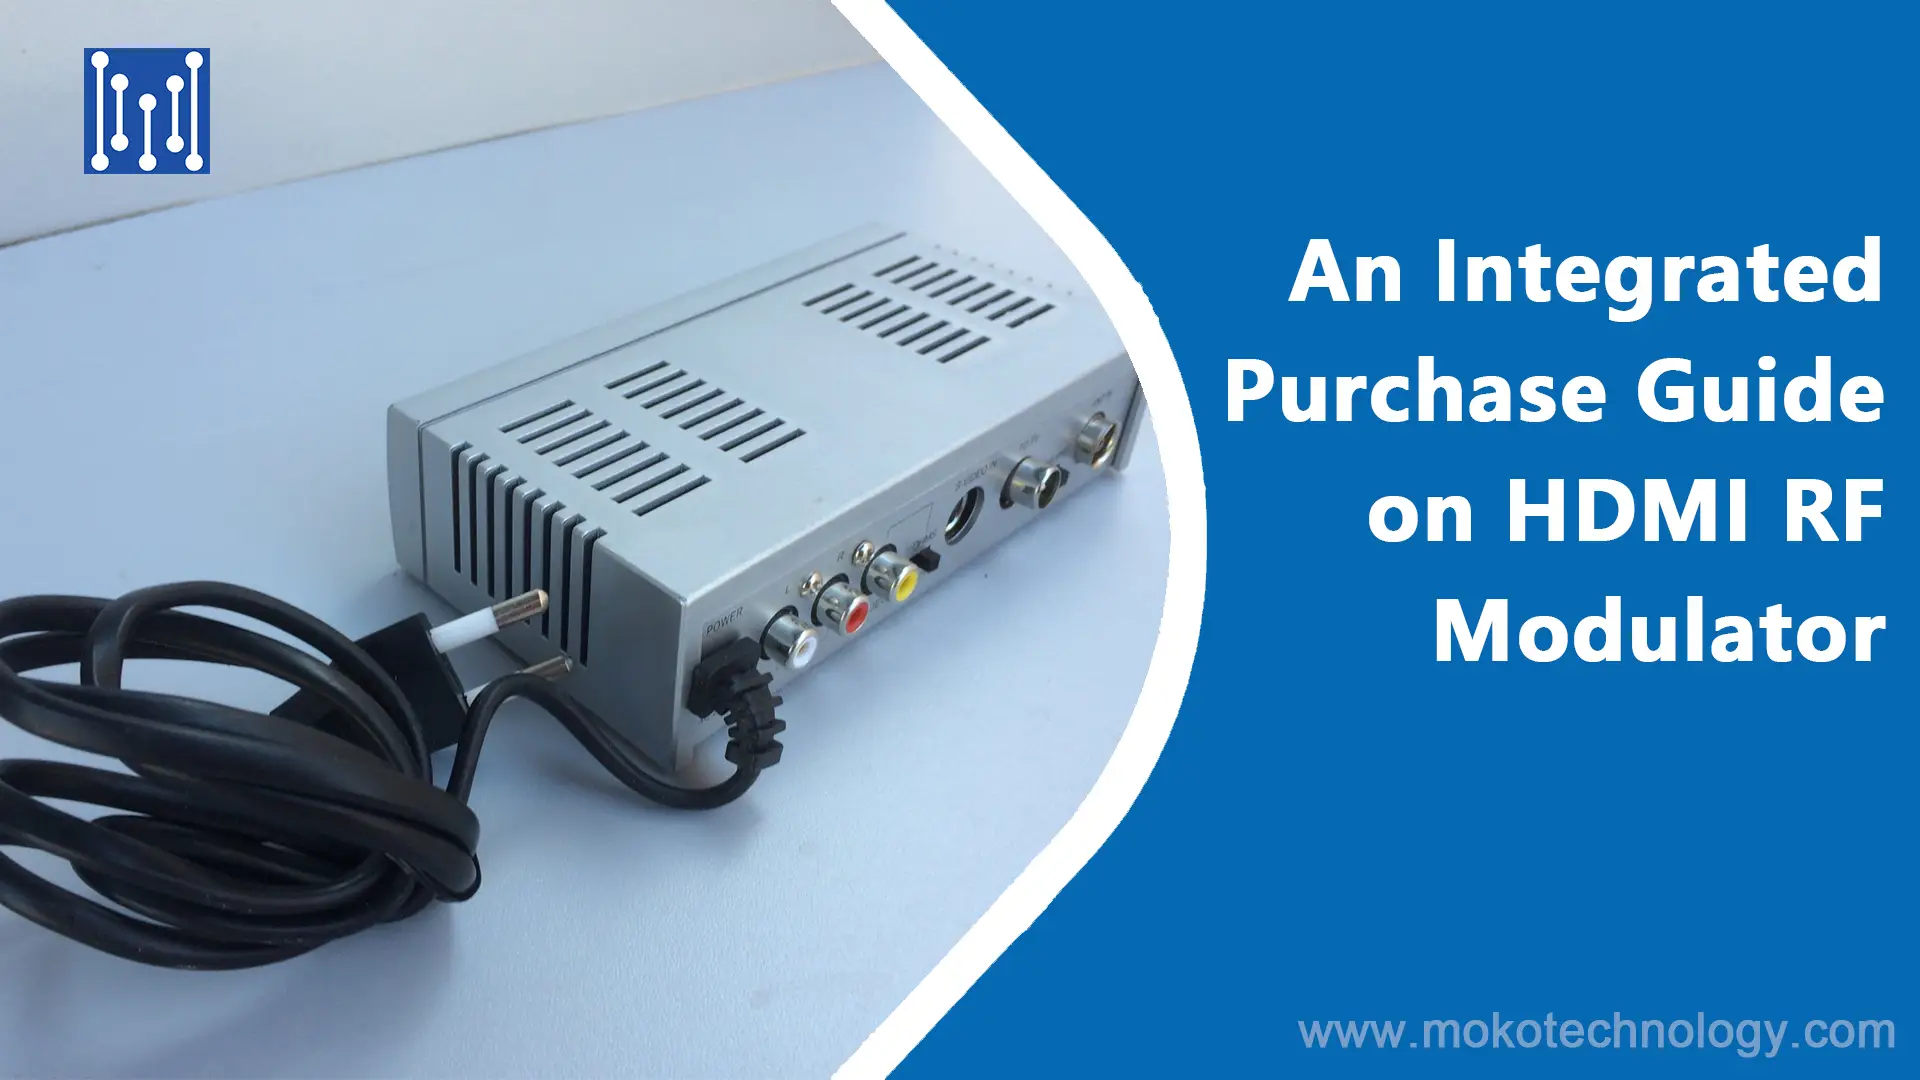 An Integrated Purchase Guide on HDMI RF Modulator